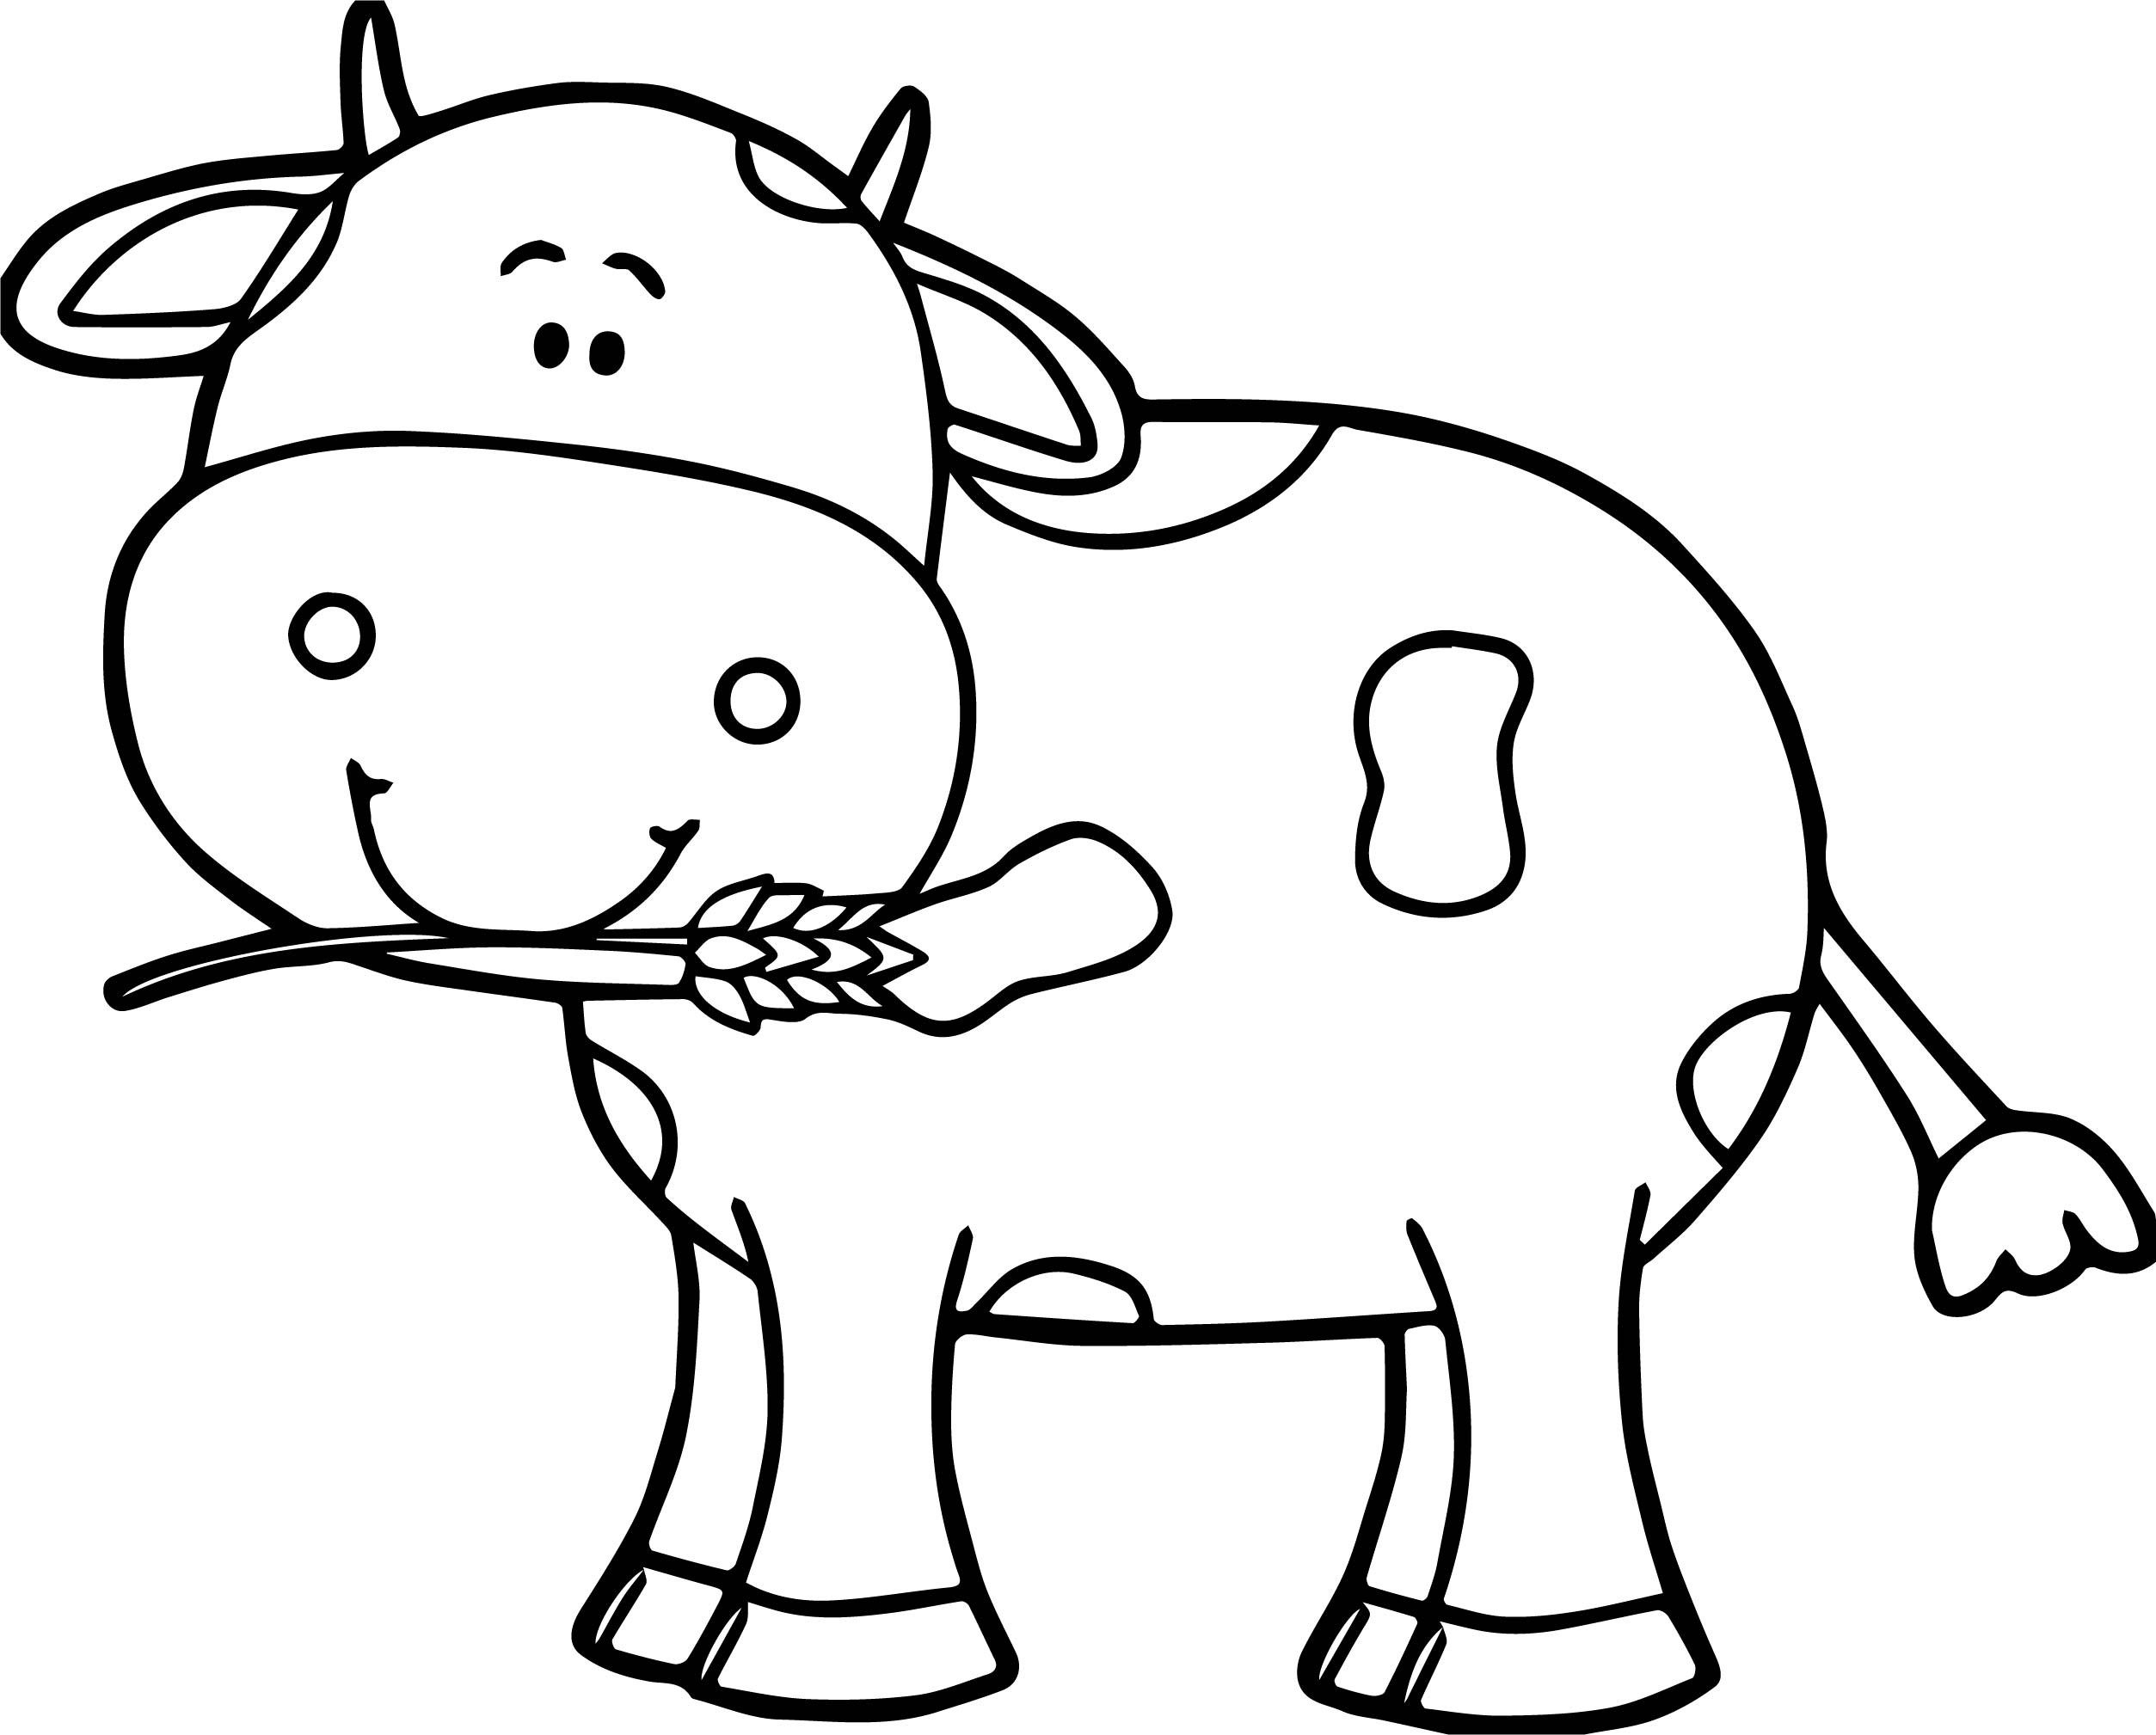 Cow Printable Coloring Pages
 Cute Cow Coloring Page